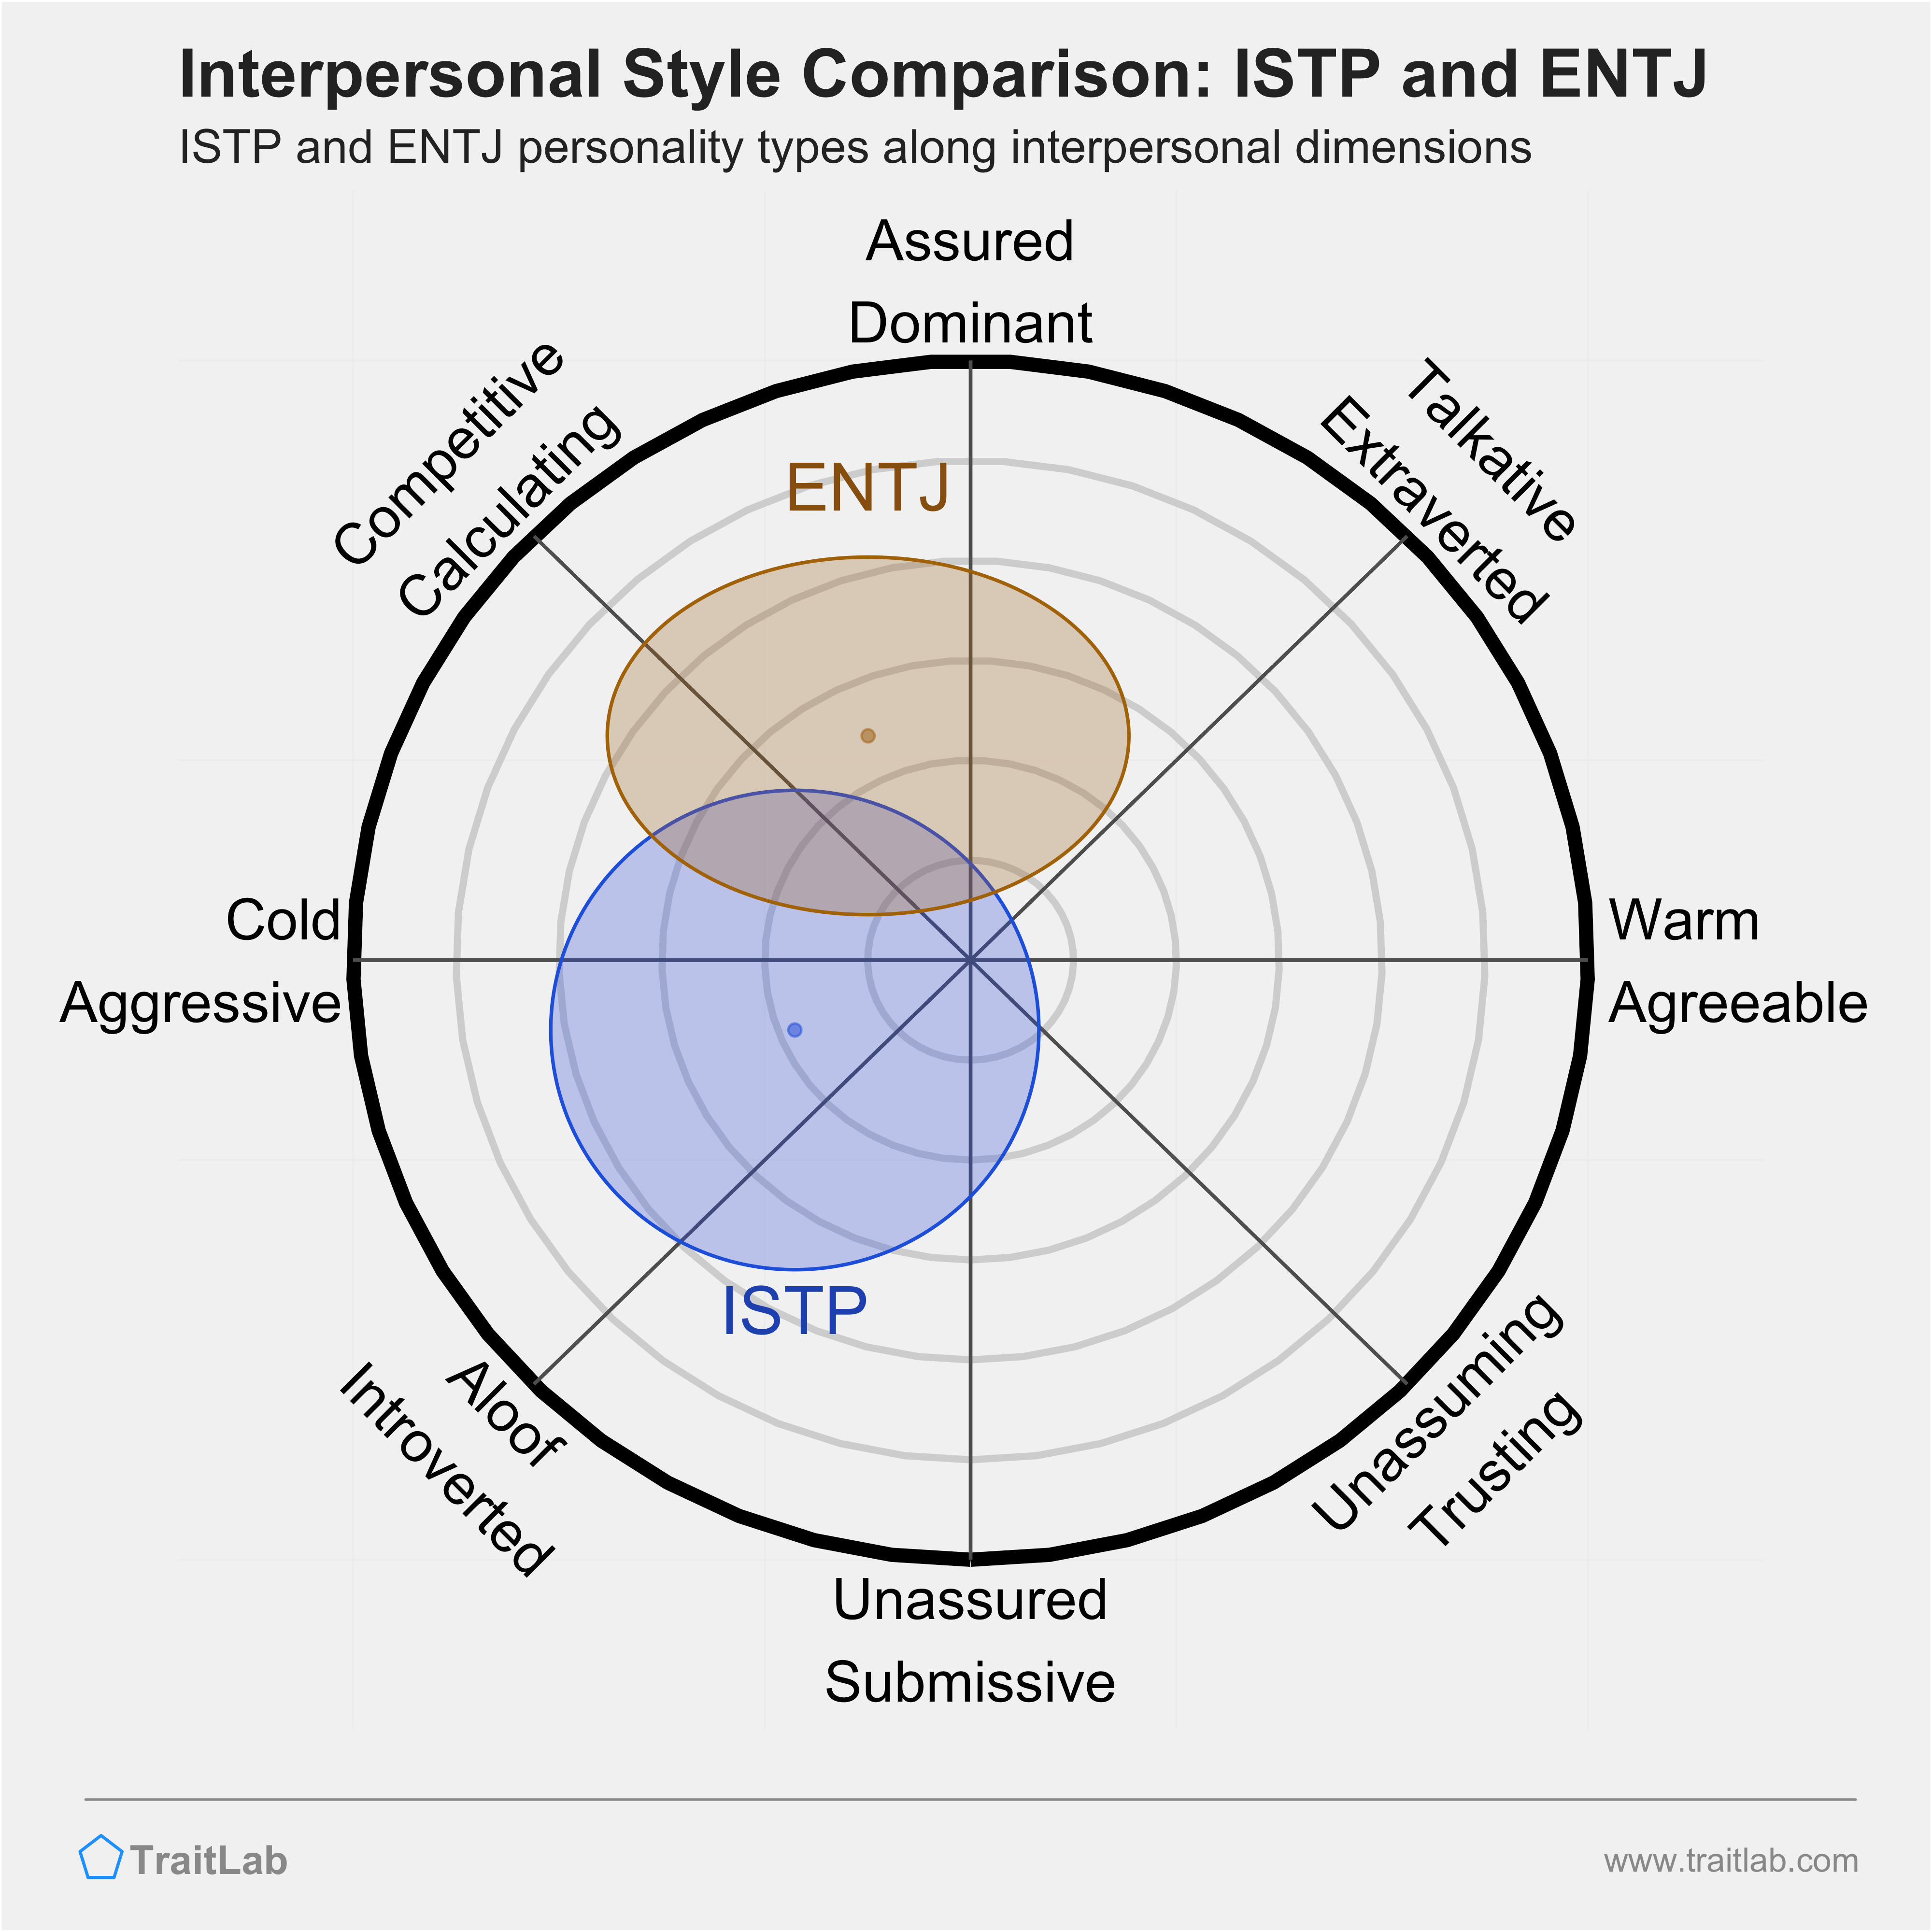 ISTP and ENTJ comparison across interpersonal dimensions